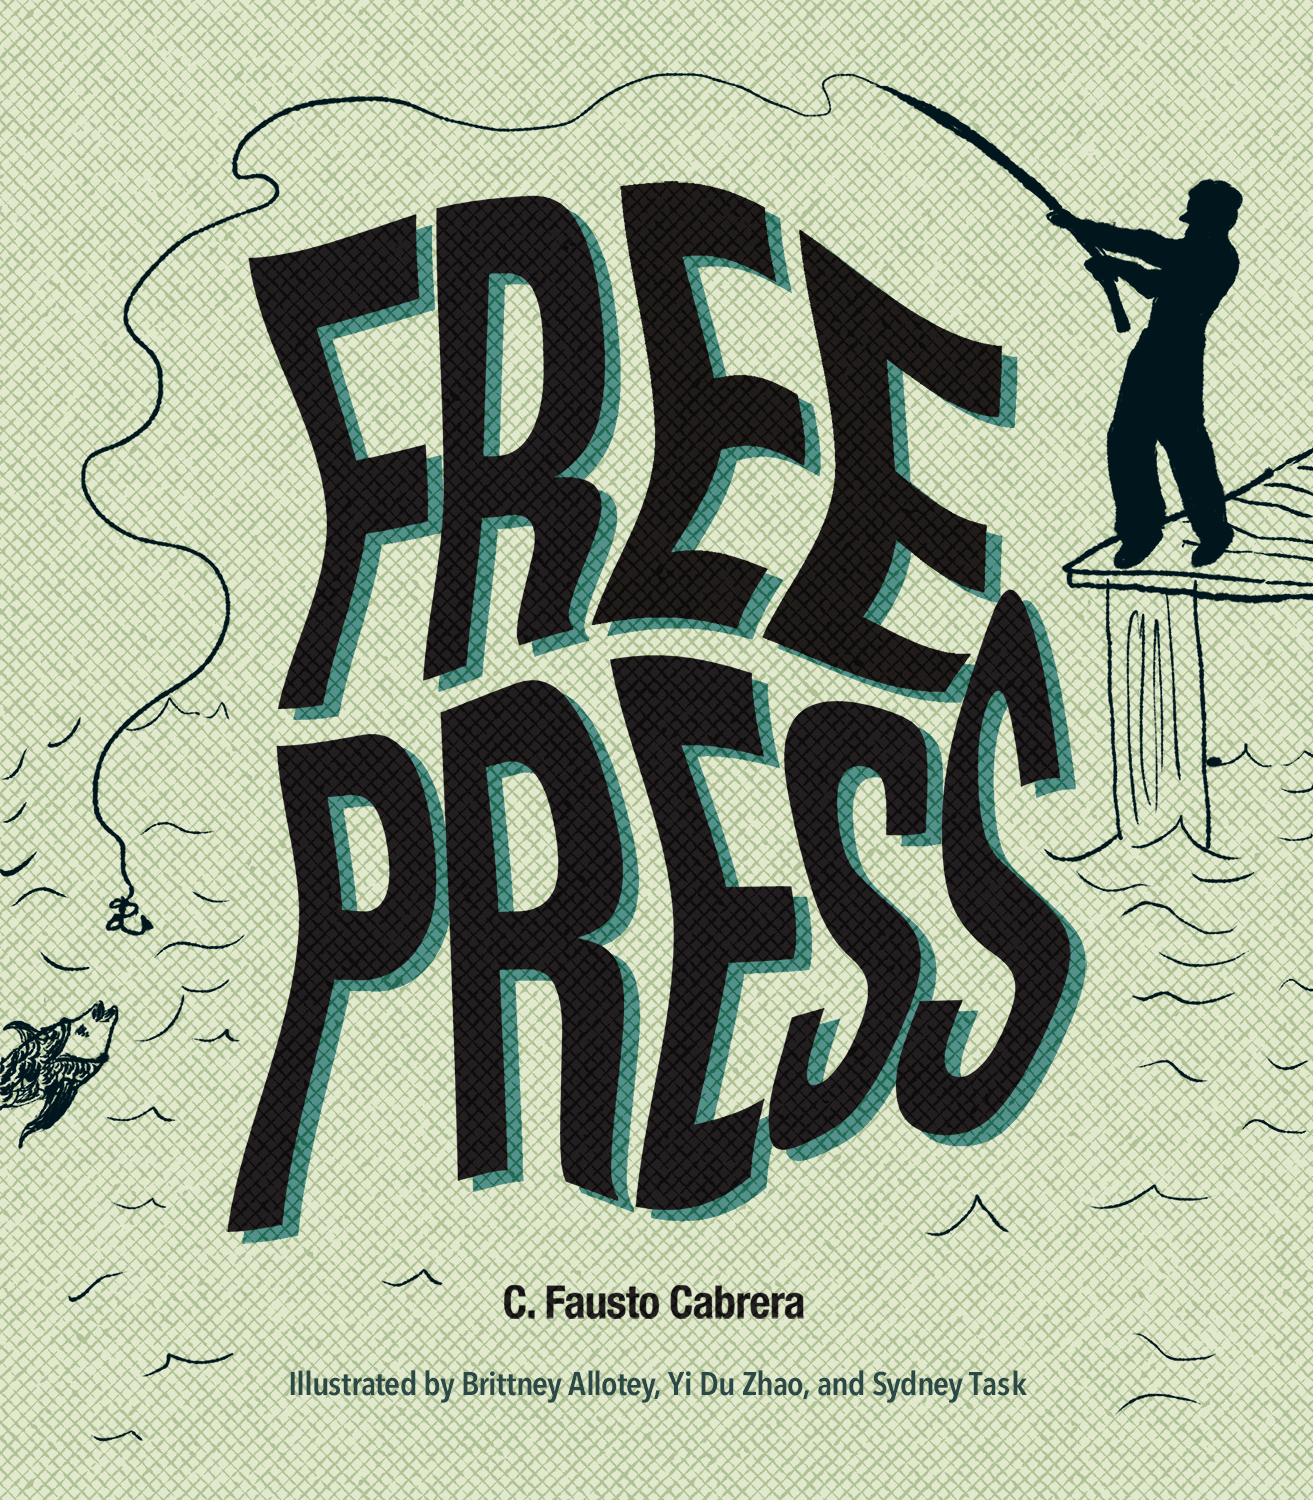 Man with fishing rod casts line into the water from a dock over the words "Free The Press." A fish swims up to bite the line.